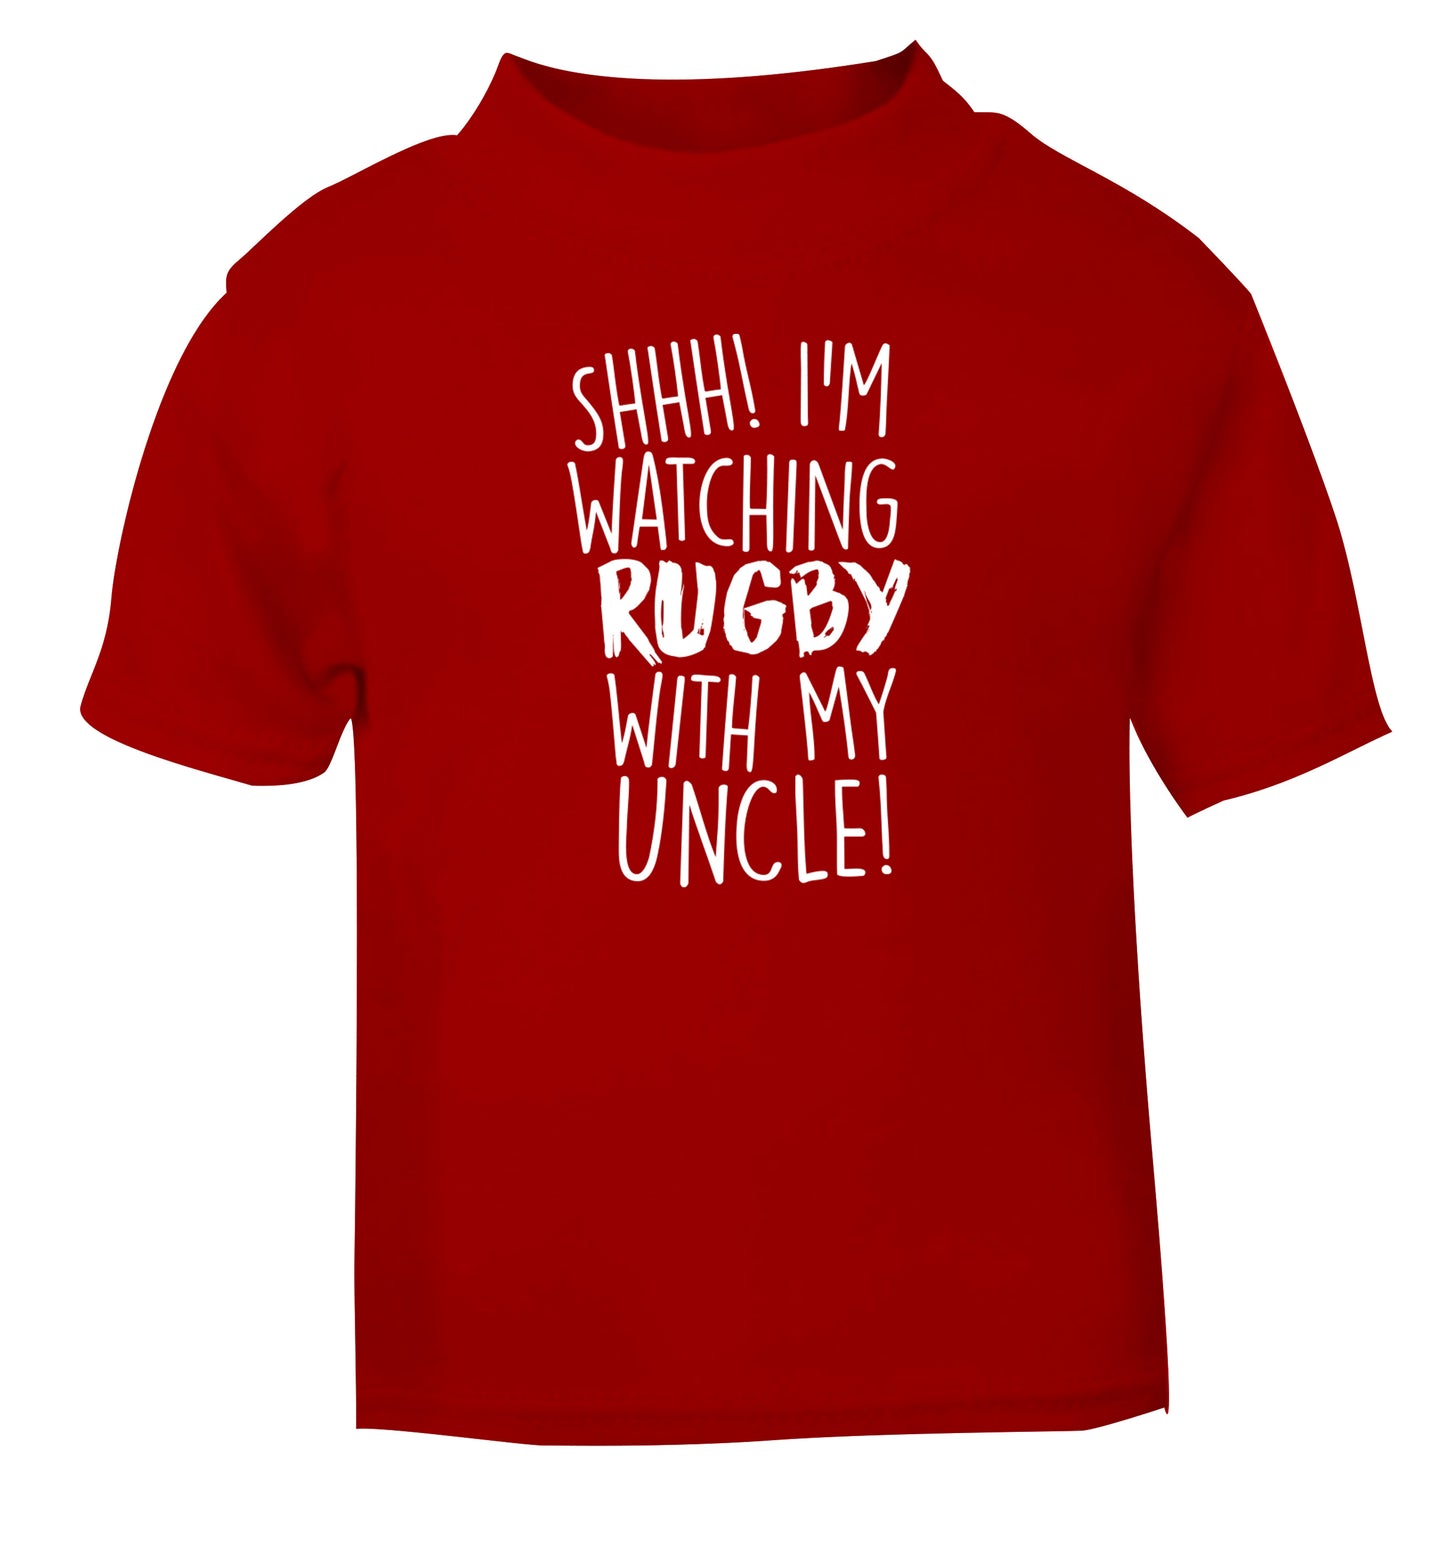 Shh.. I'm watching rugby with my uncle red Baby Toddler Tshirt 2 Years